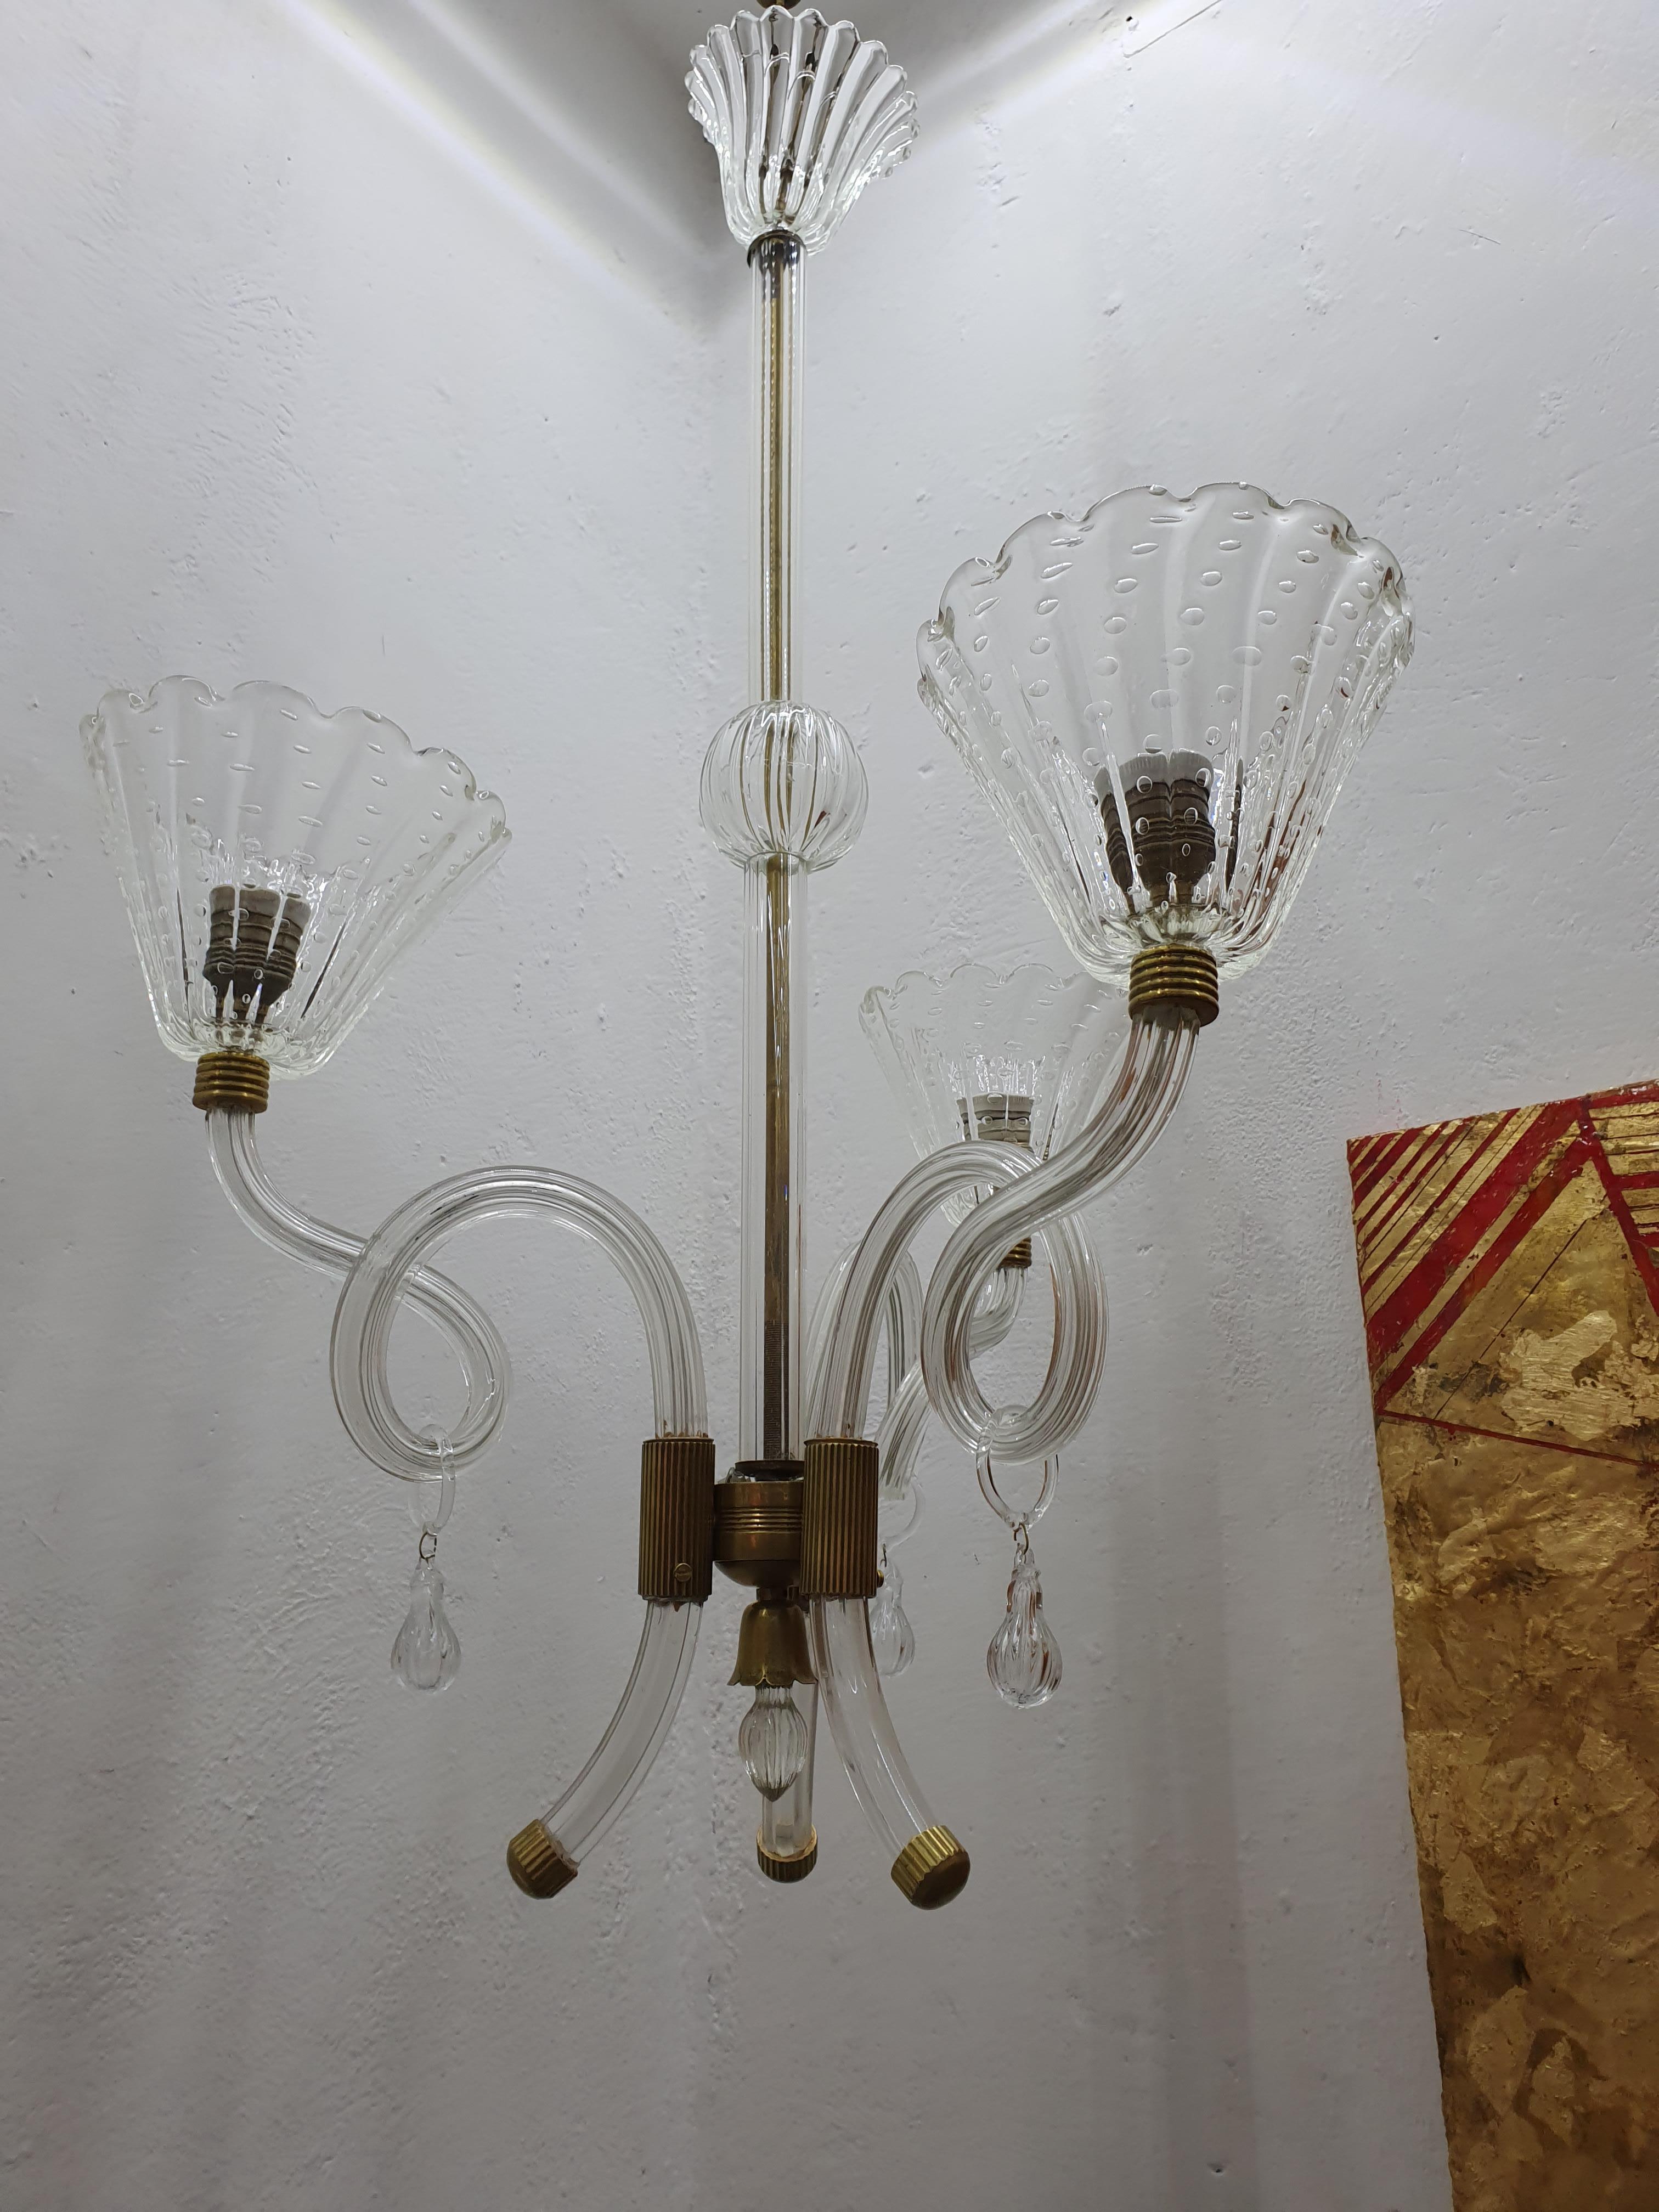 Mid-Century Modern Chandelier by Barovier Toso in Murano Glass, Italy circa 1950 For Sale 3